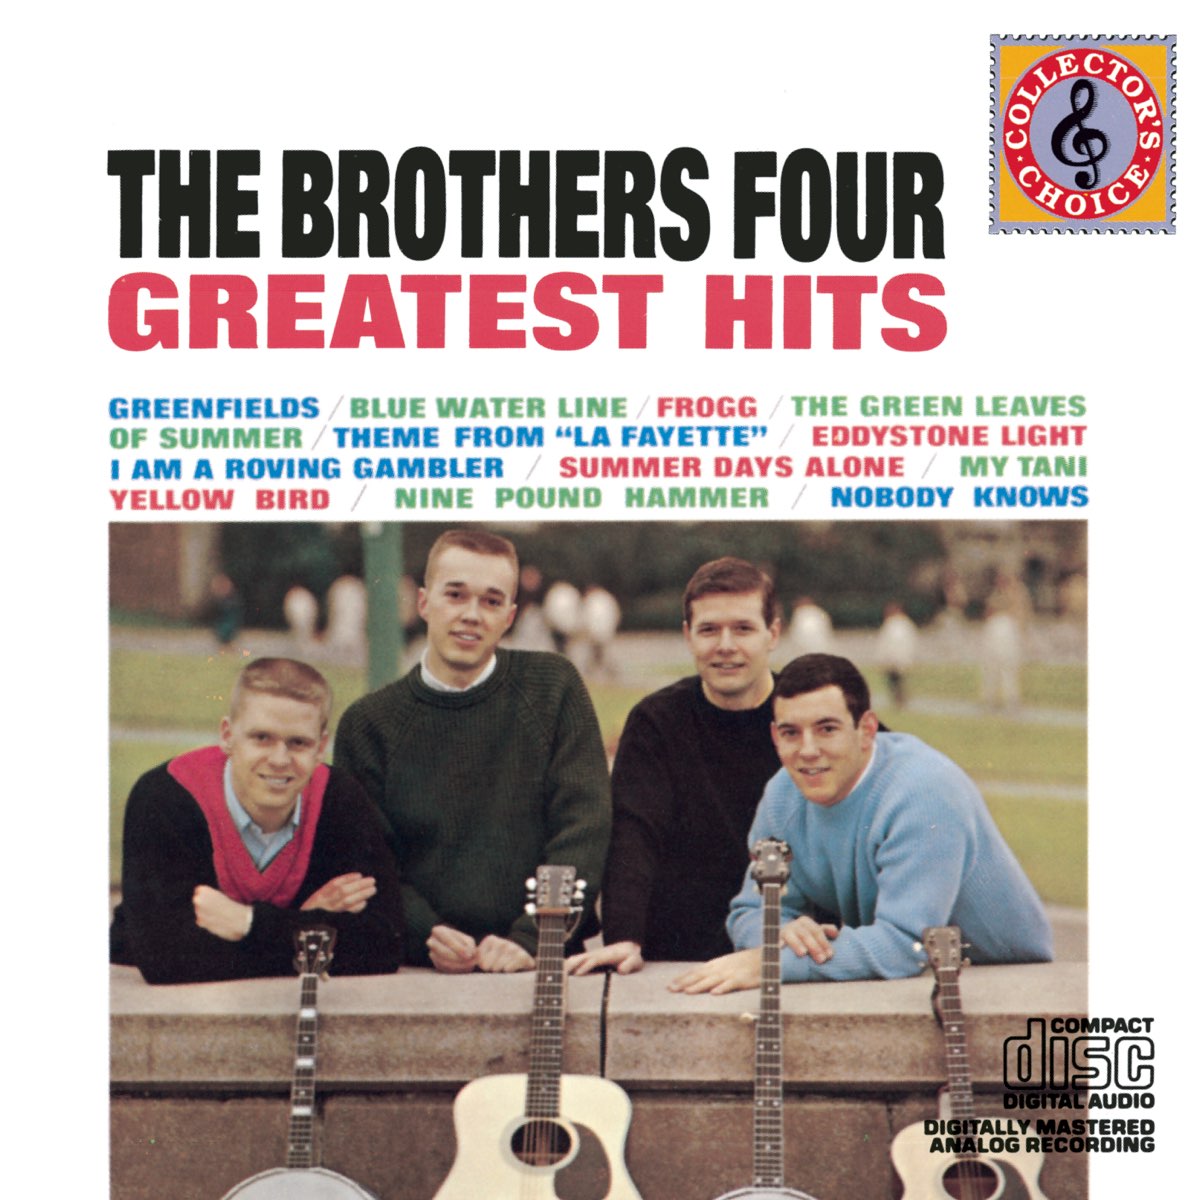 The Brothers Four: Greatest Hits – Album par The Brothers Four – Apple Music